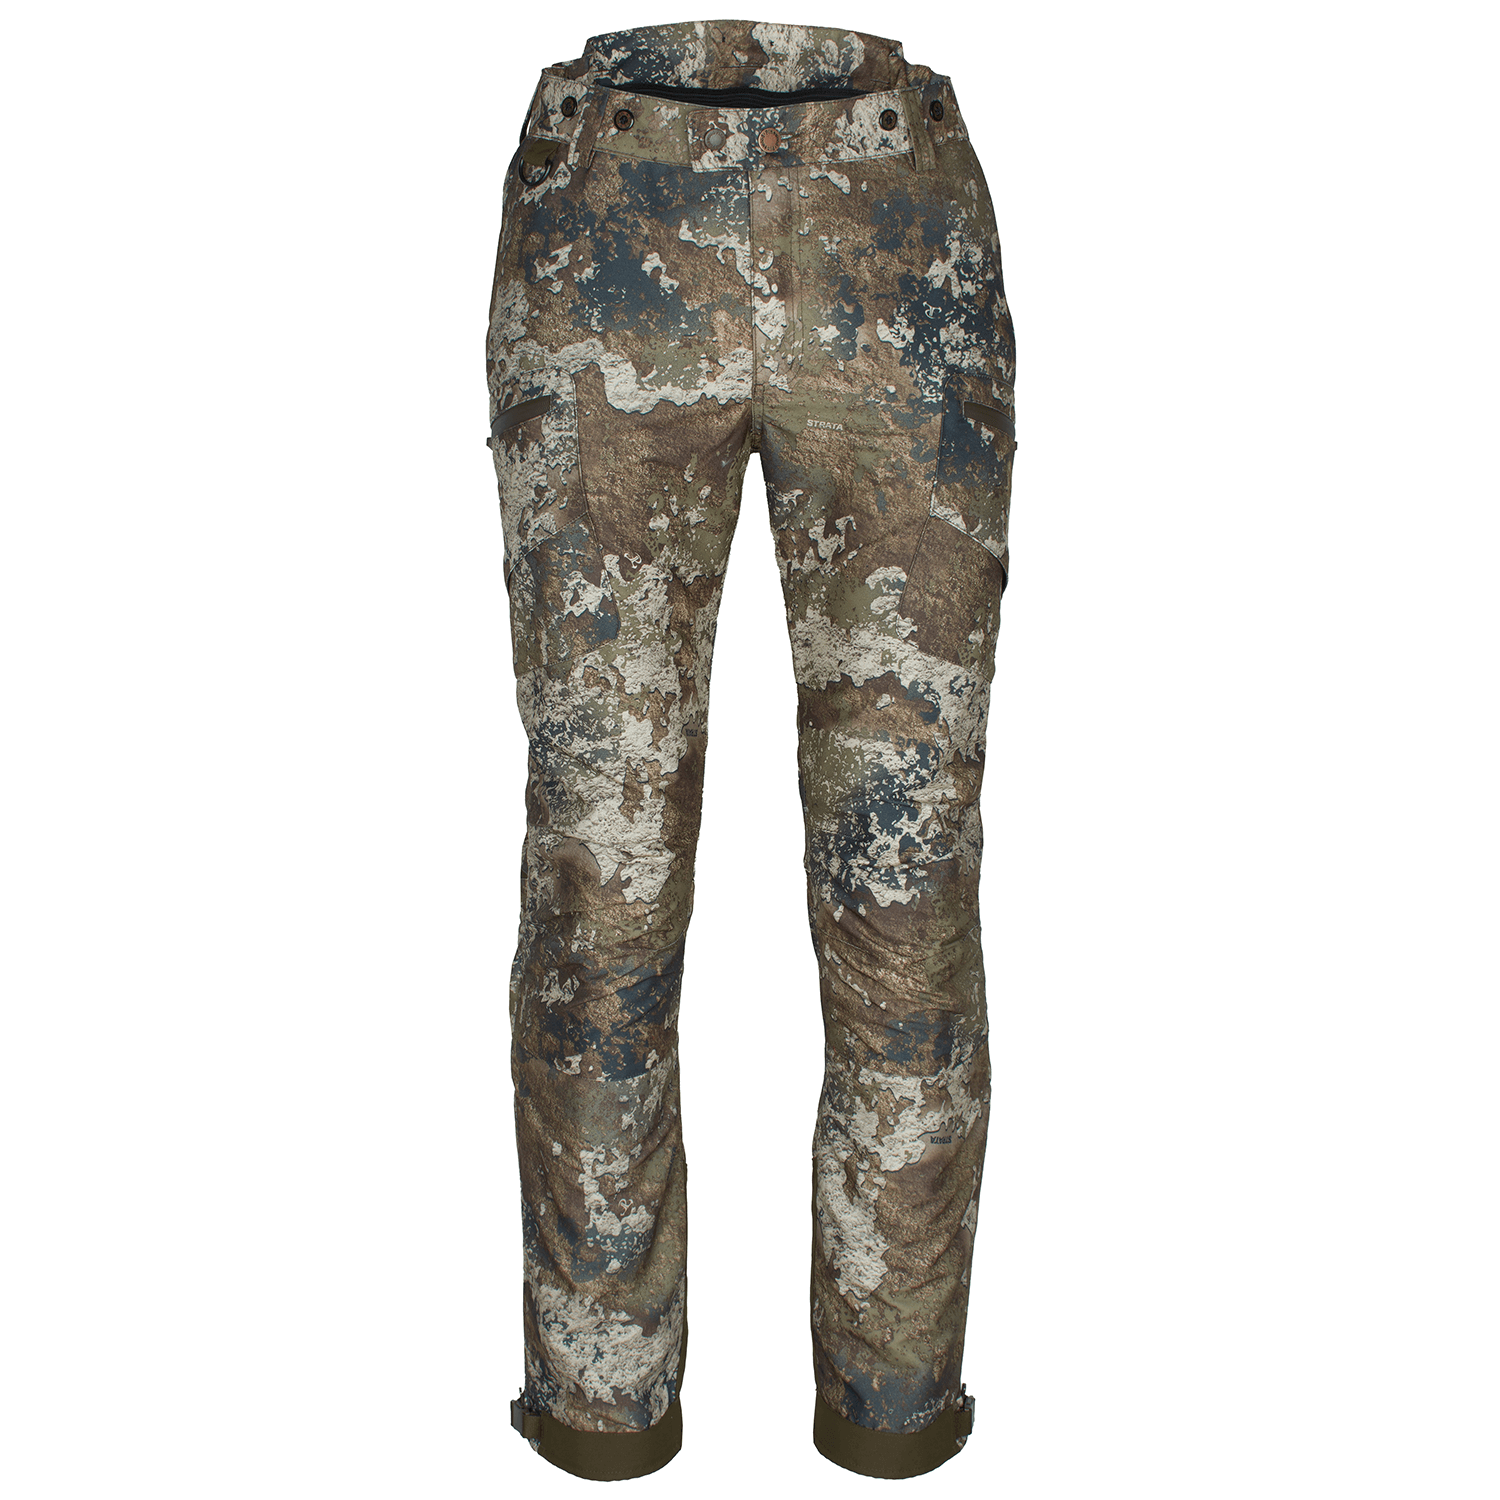 Pinewood Trousers Hunter Pro Xtreme 2.0 Camo (Strata) - Camouflage Trousers